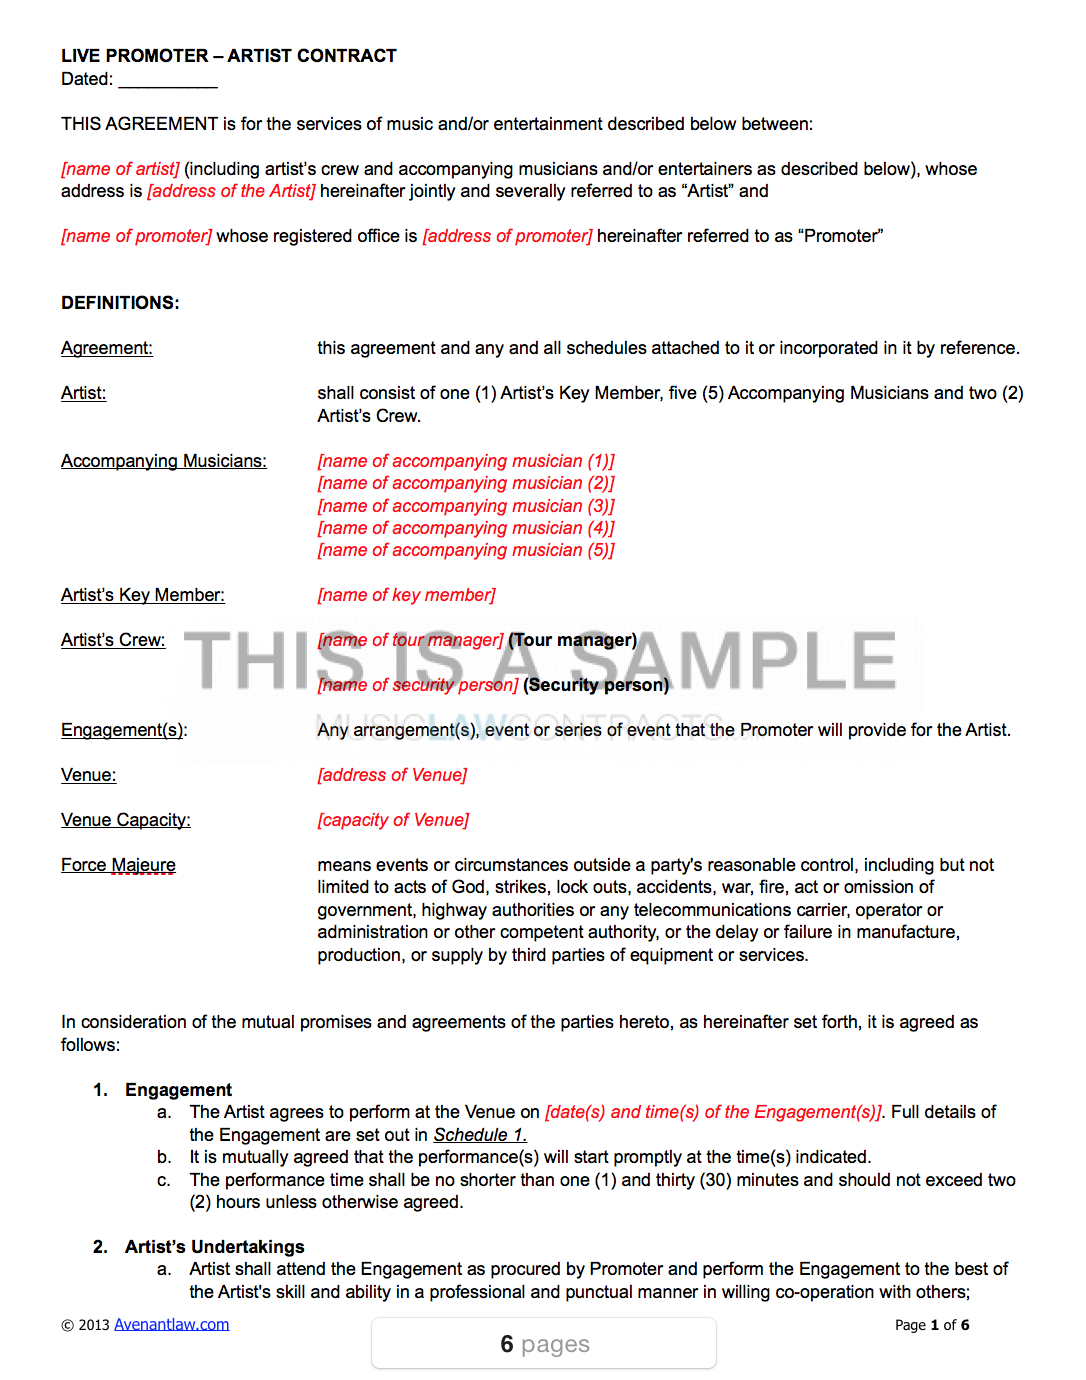 Agency Agreement Draft Promoter Contract Pack 15 Contracts